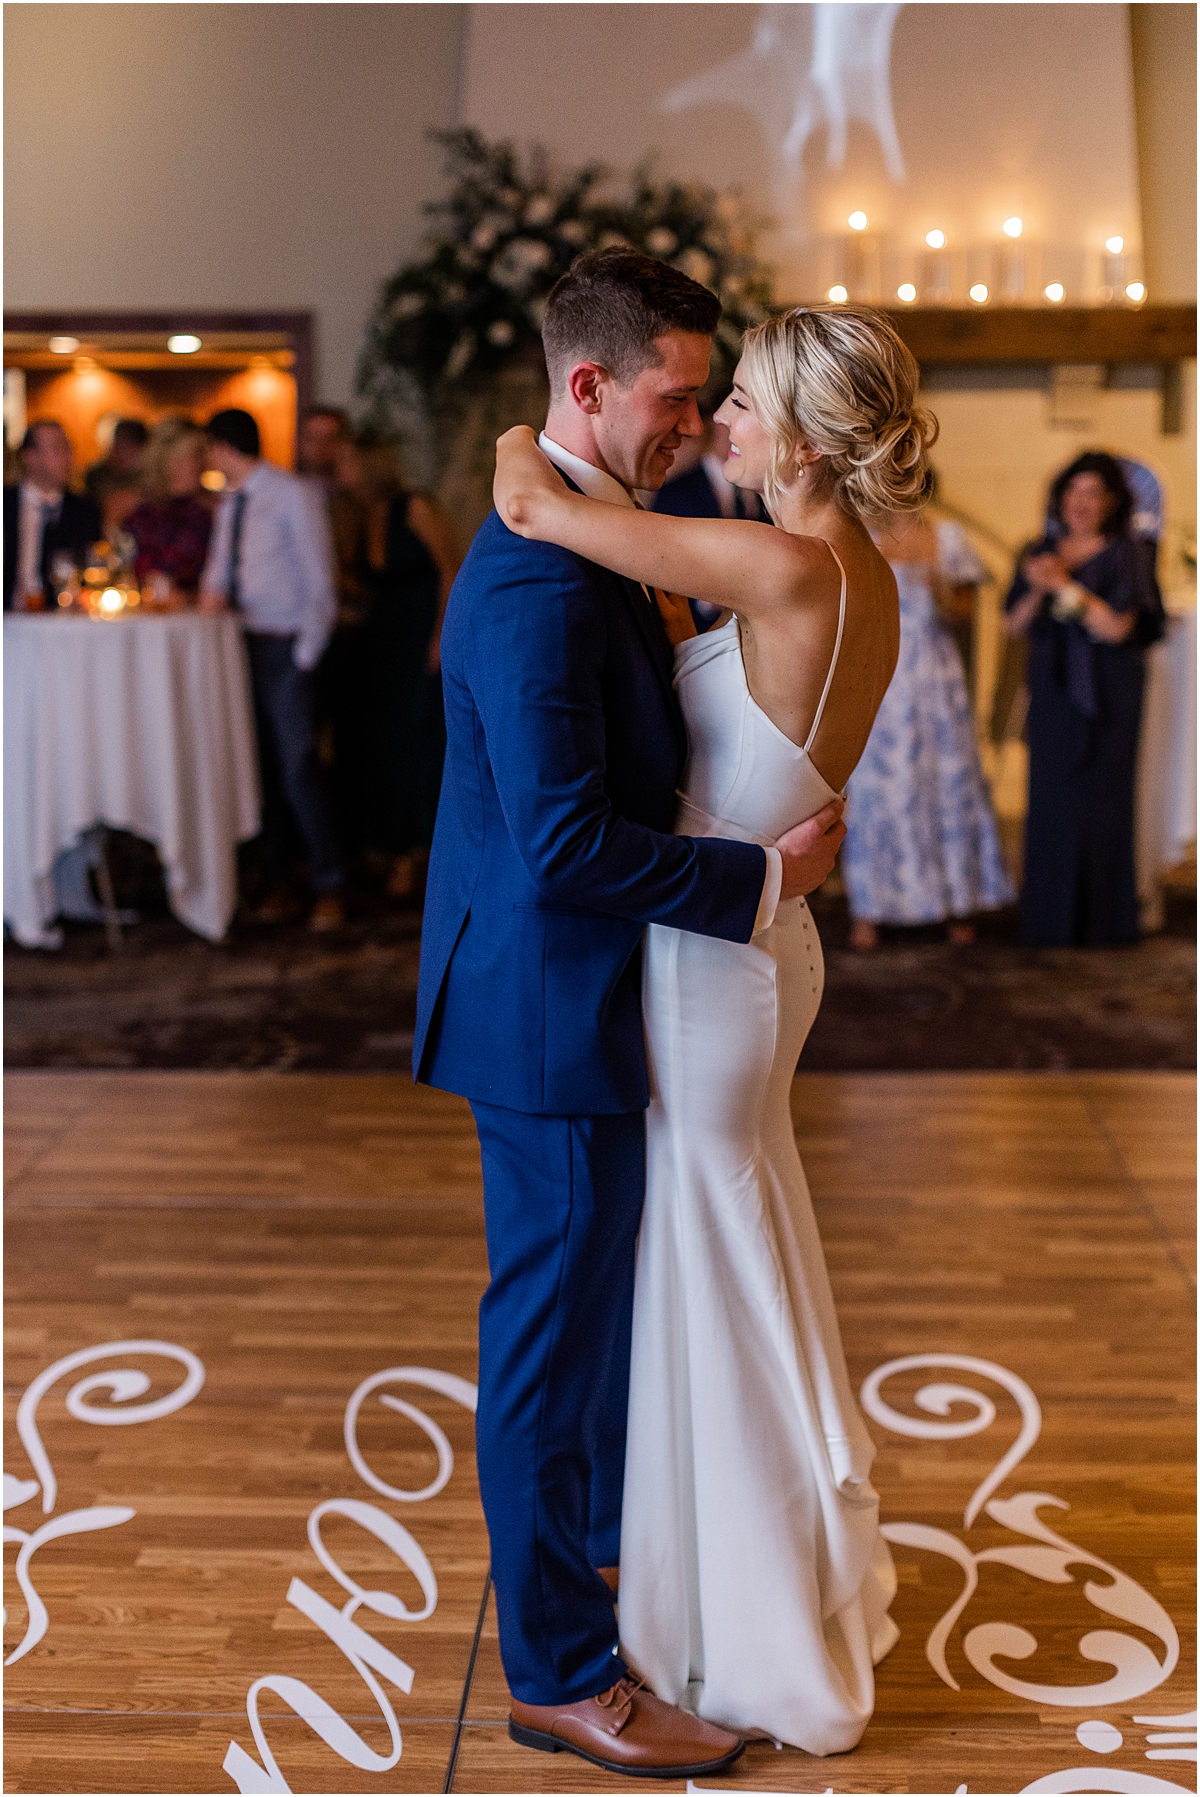 candid moment of newlyweds sharing first dance